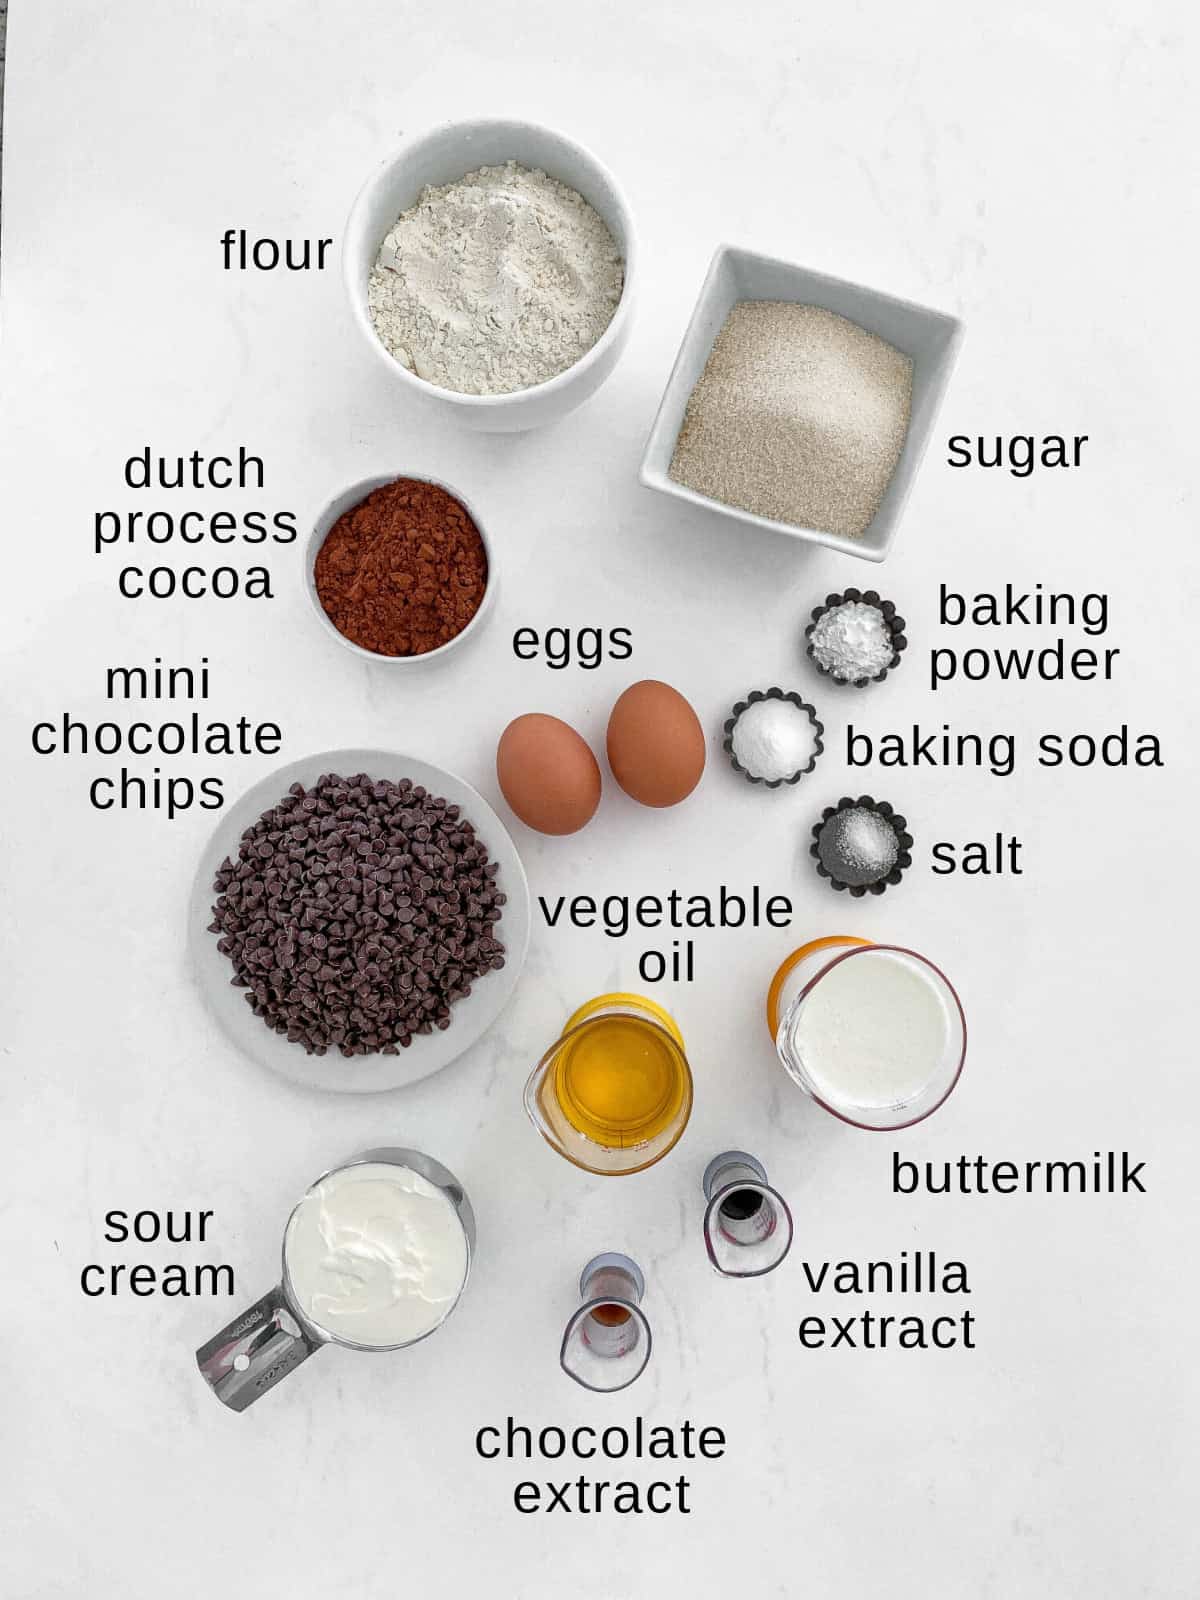 Double chocolate muffins ingredients.